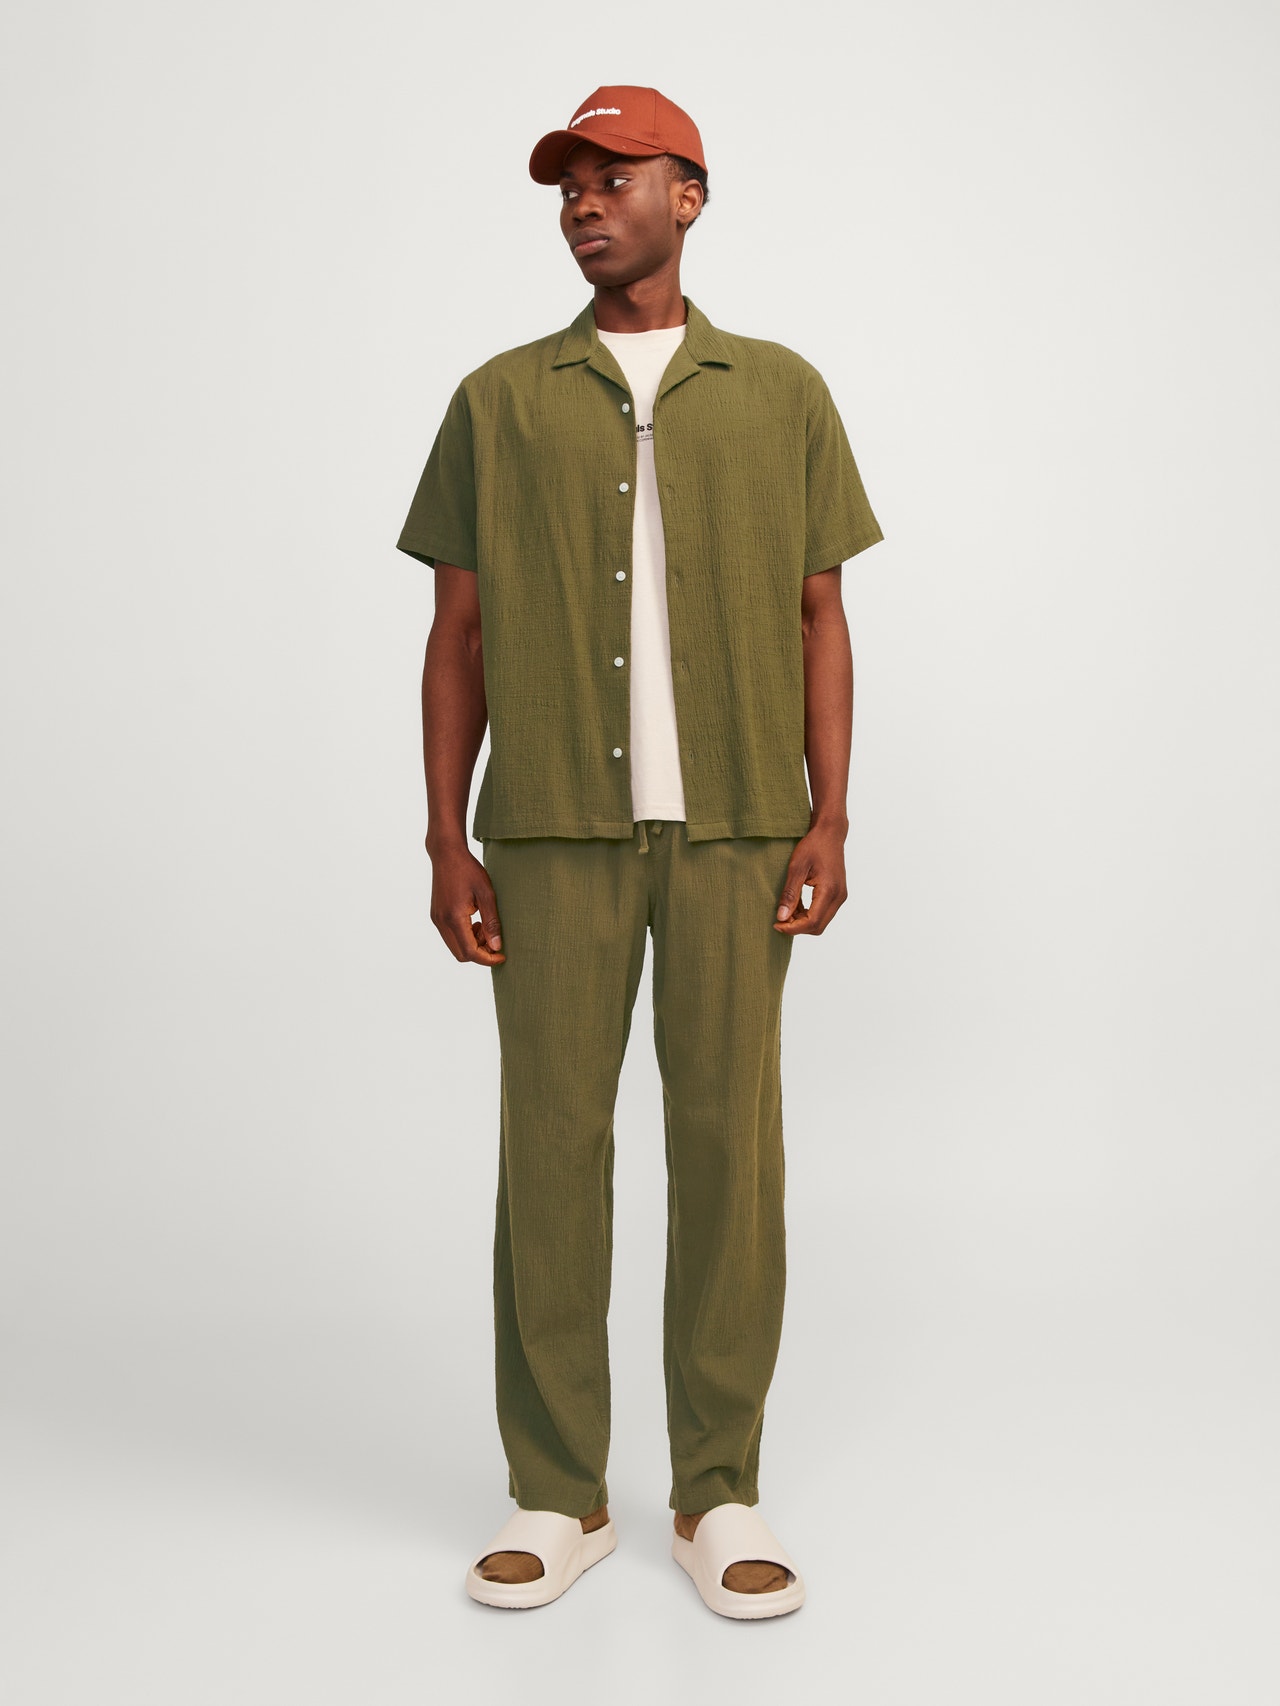 Jack & Jones Relaxed Fit Resort -Olive Night - 12255781